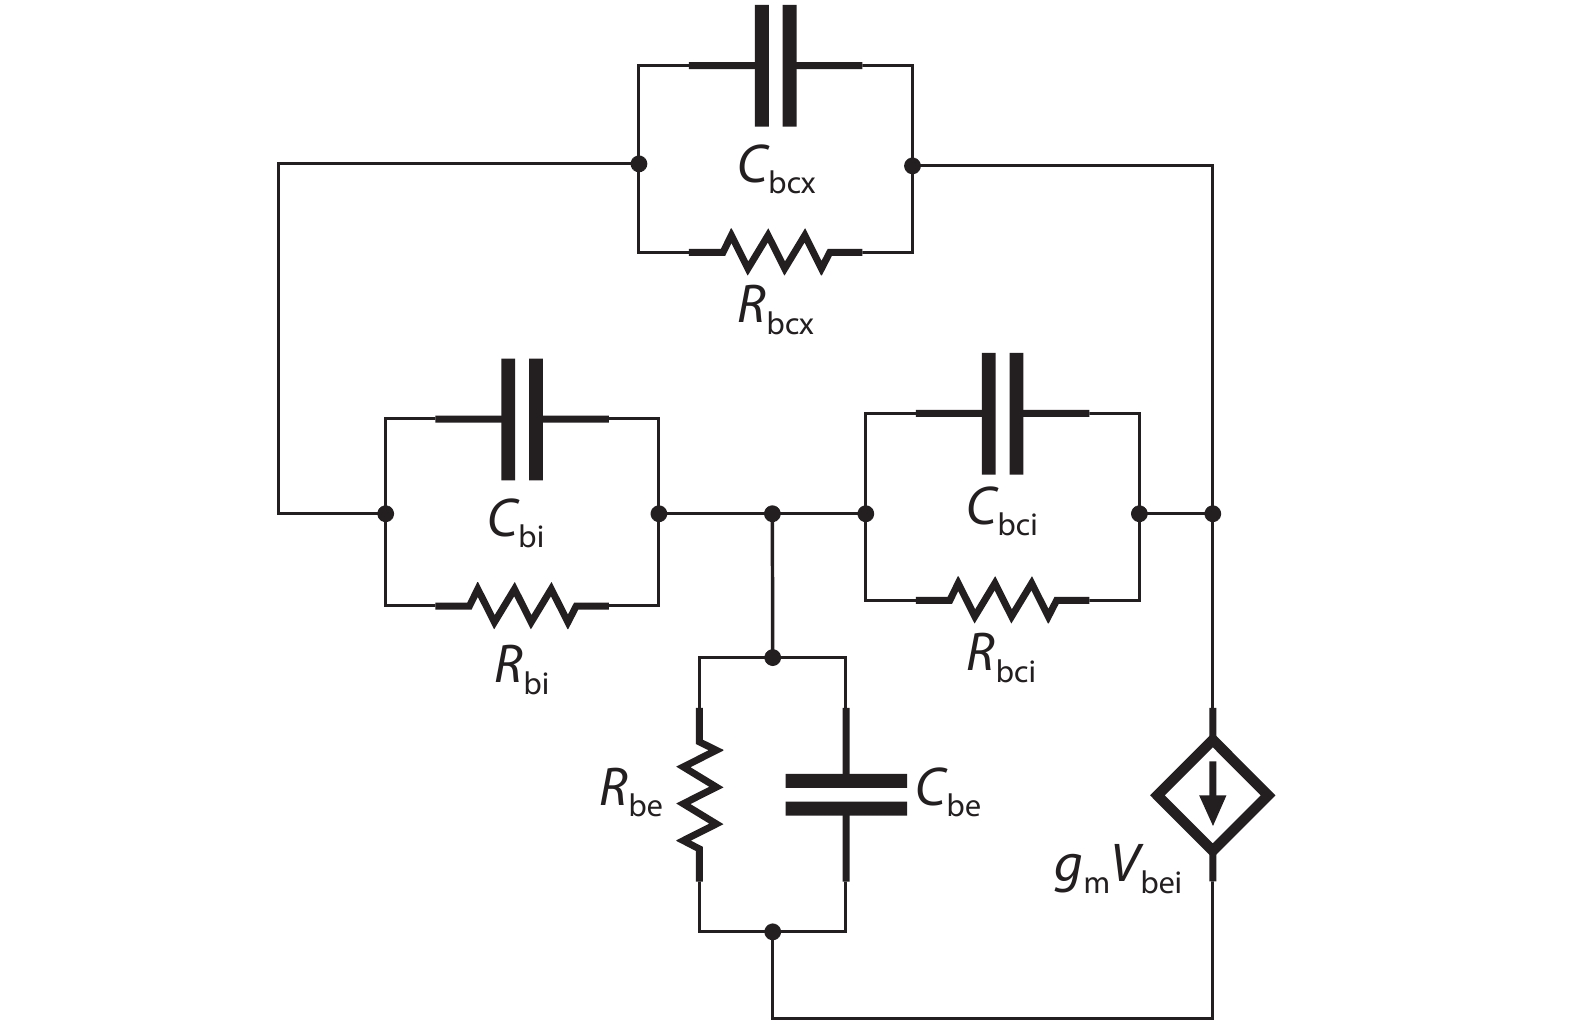 Small-signal equivalent circuit after de-embedding the extrinsic parameters.